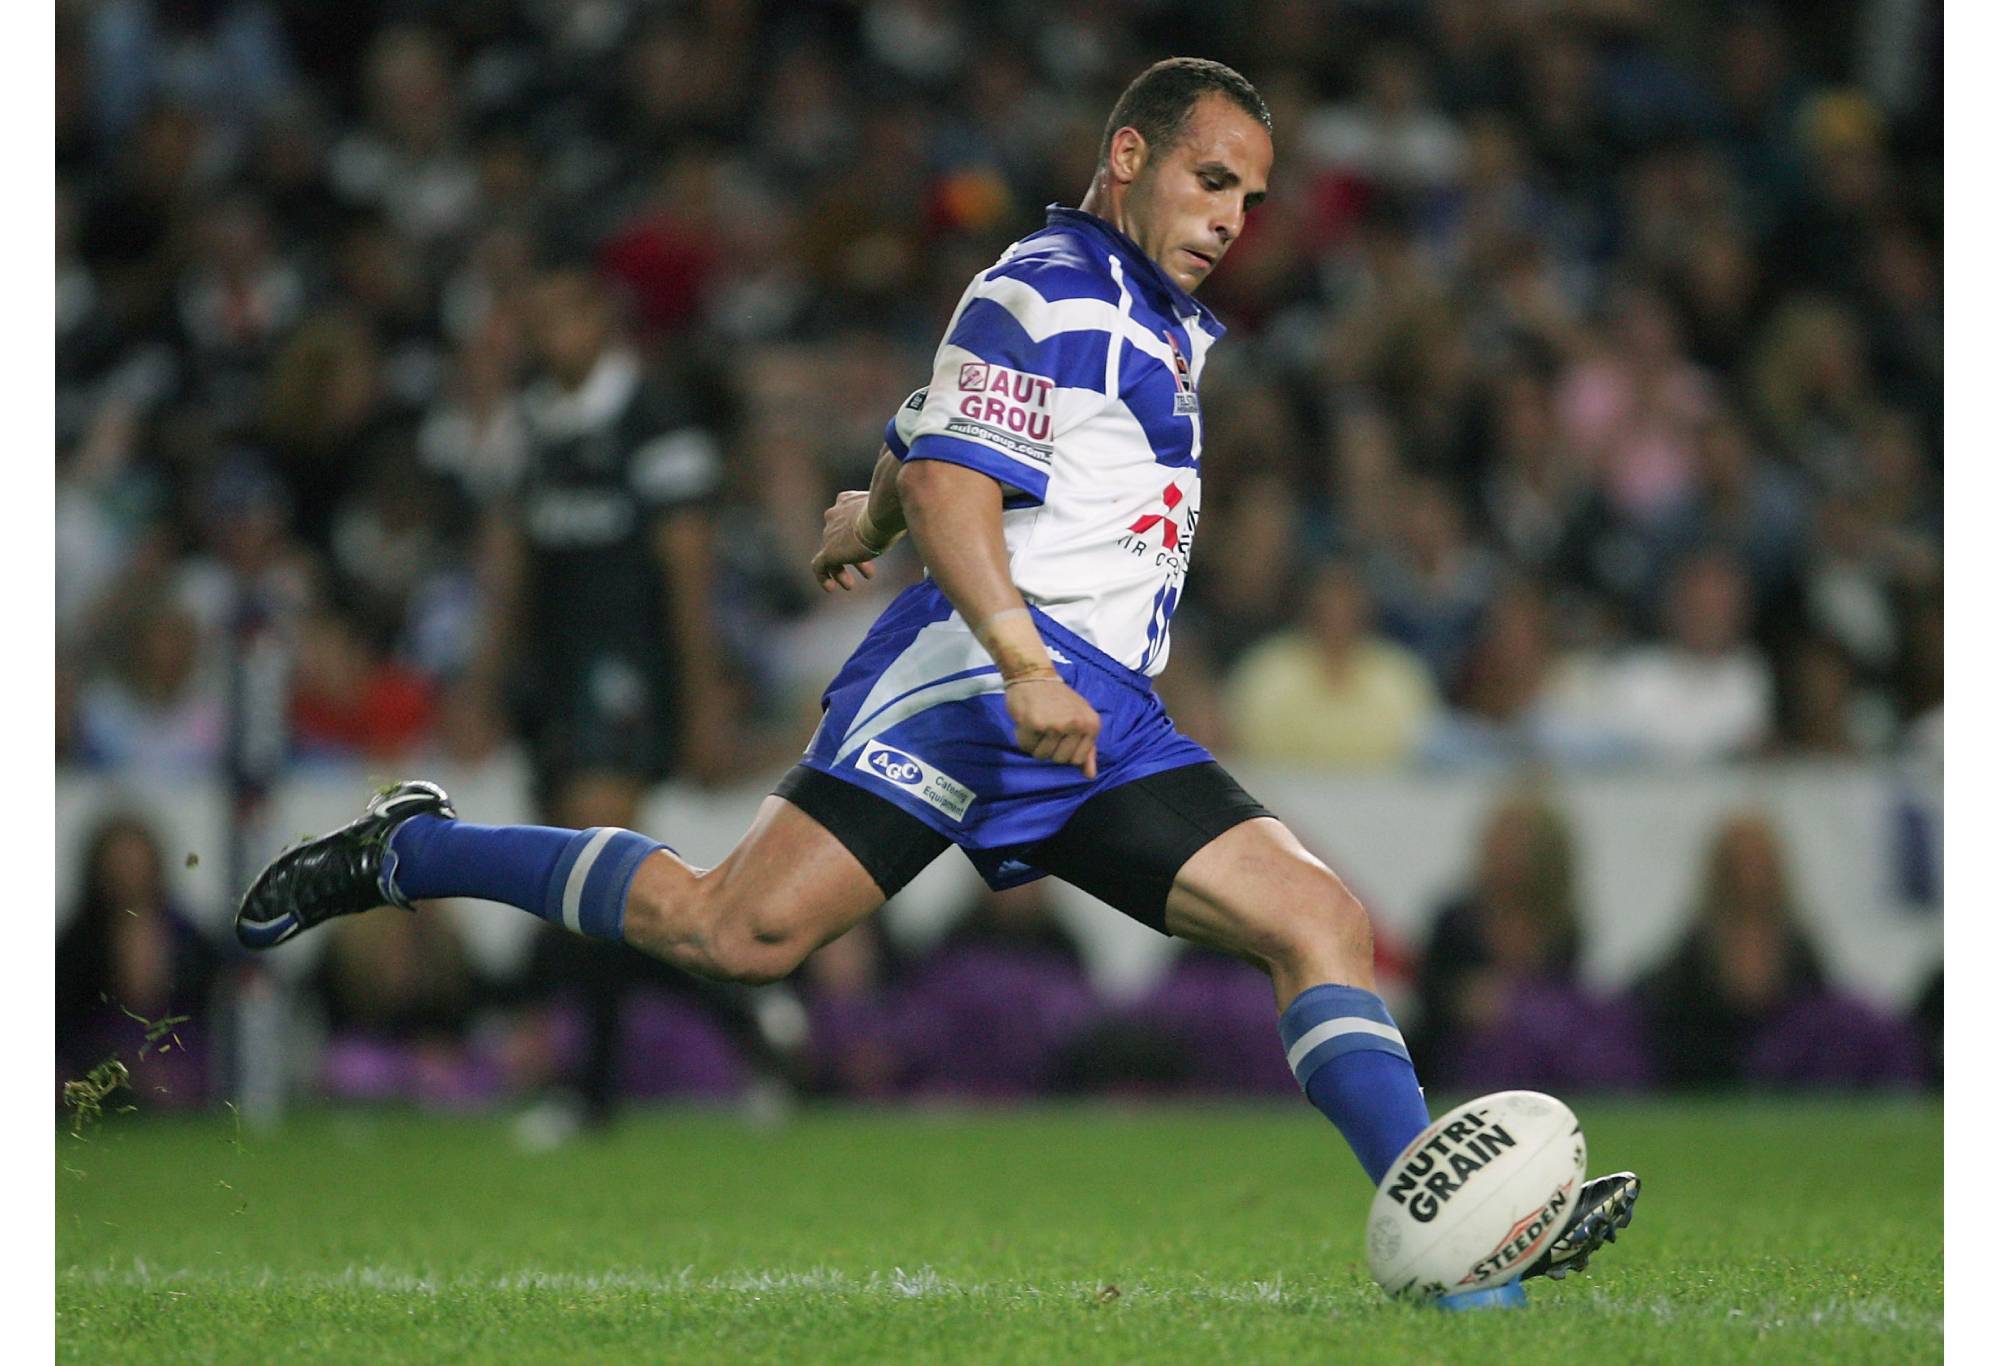 SYDNEY, AUSTRALIA - SEPTEMBER 25: Hazem El Masri of the Bulldogs kicks a goal during the NRL Preliminary Final match between the Bulldogs and the Penrith Panthers at Aussie Stadium September 25, 2004 in Sydney, Australia. (Photo by Adam Pretty/Getty Images)